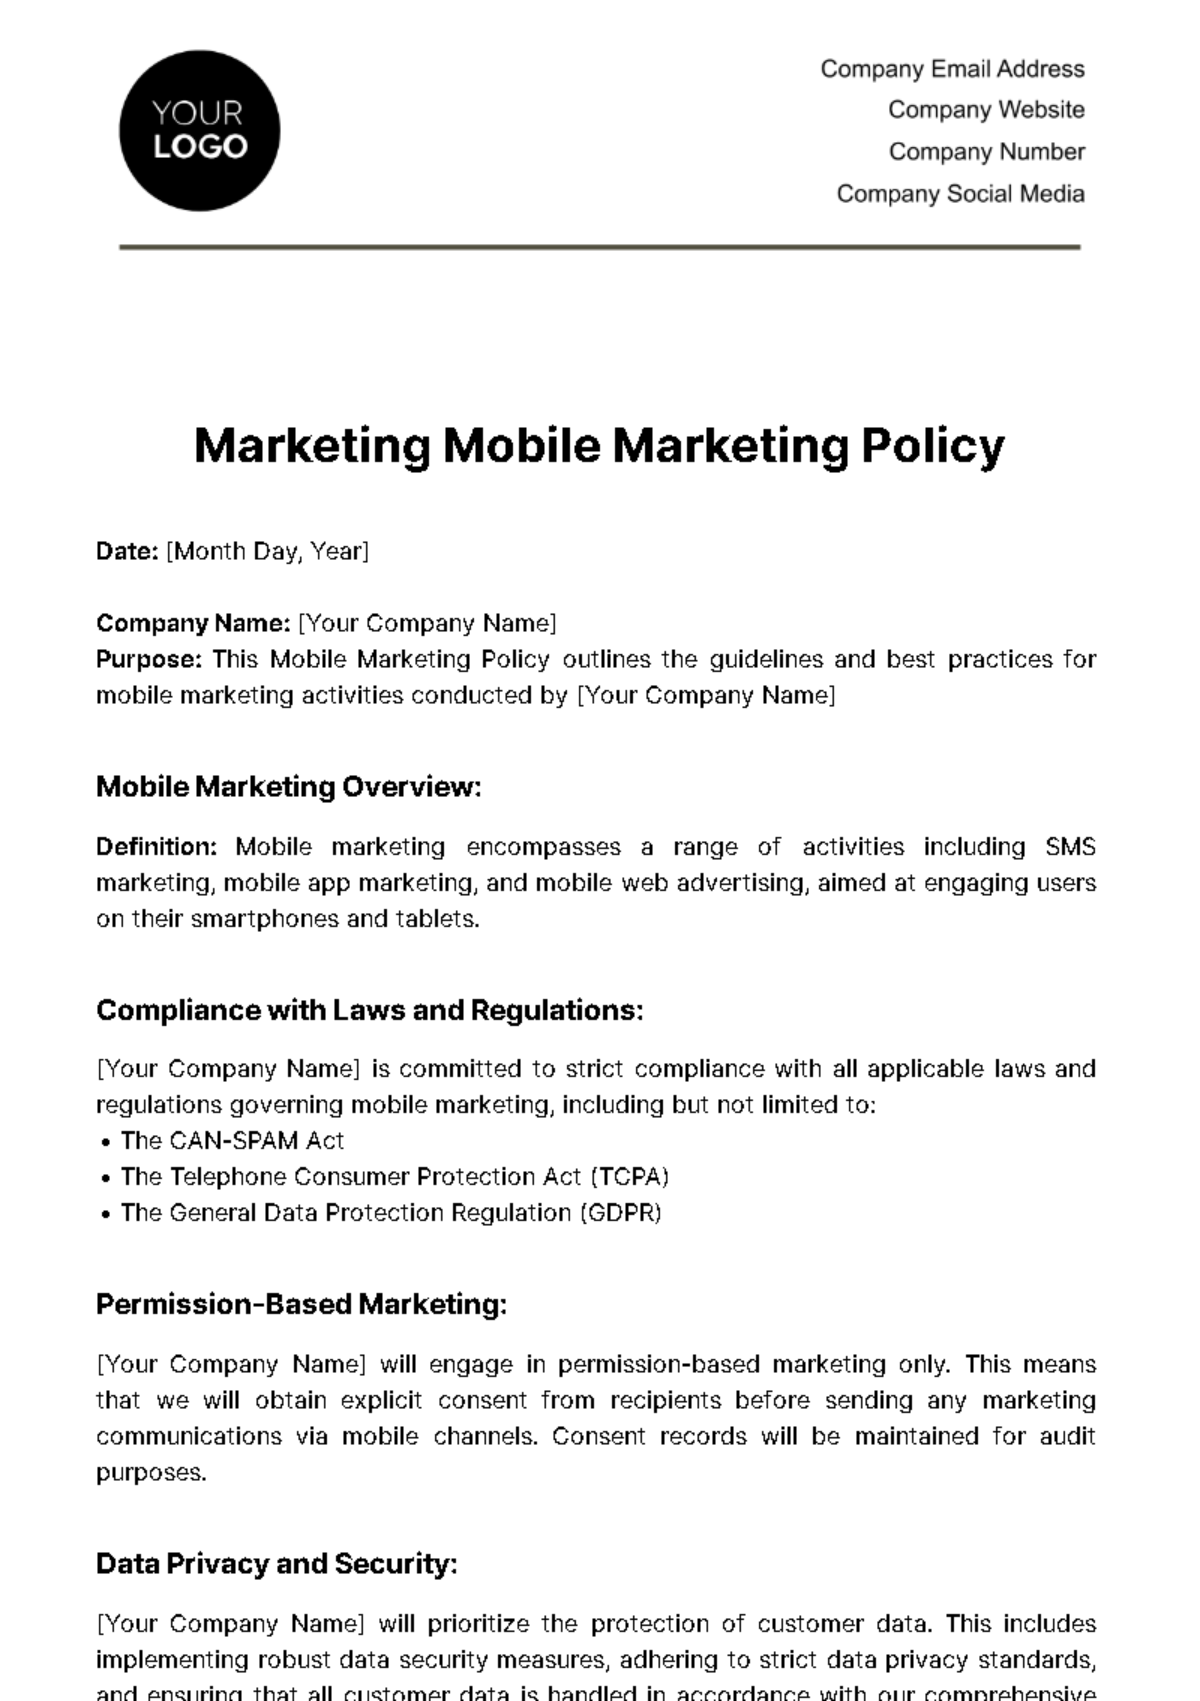 Marketing Mobile Marketing Policy Template